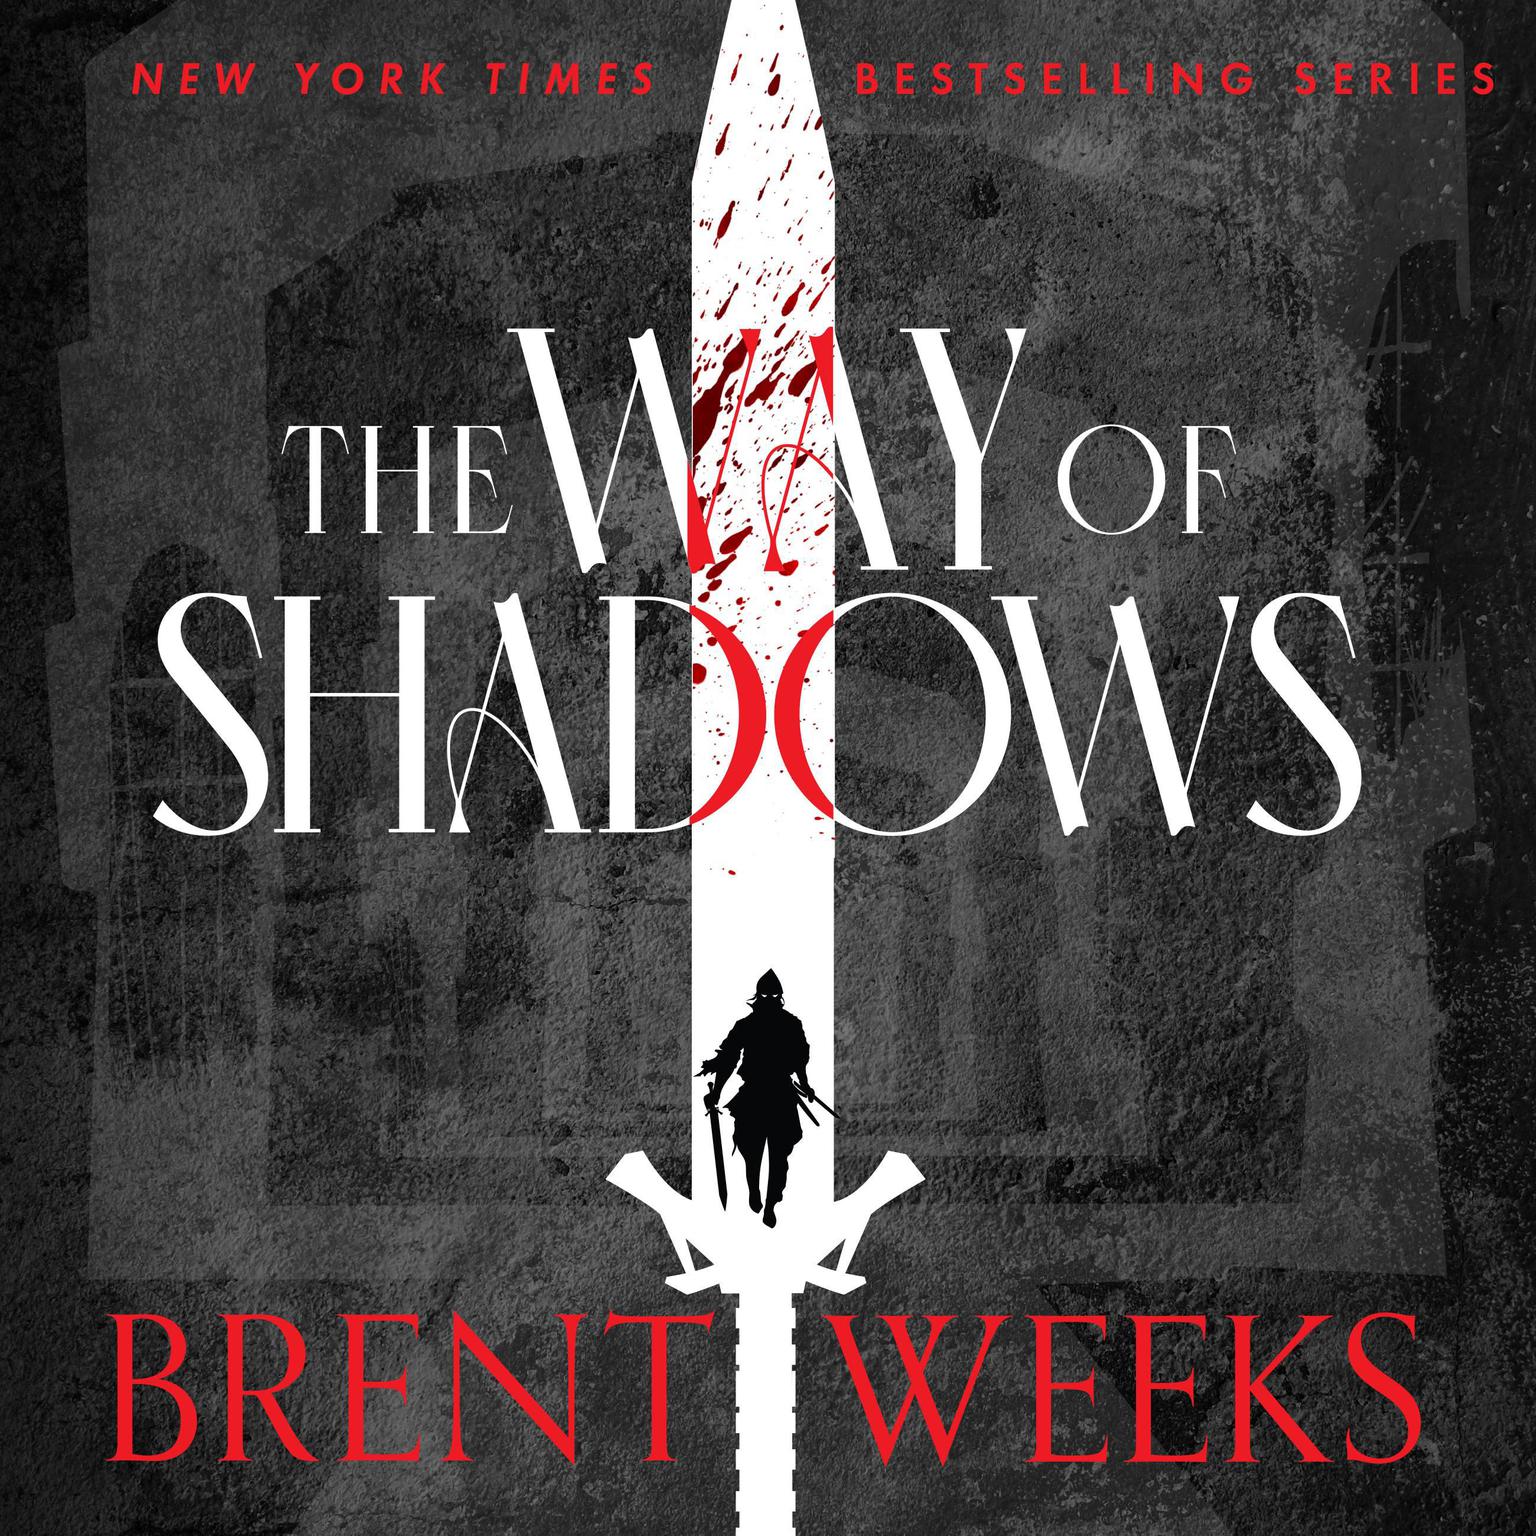 The Way of Shadows Audiobook, by Brent Weeks